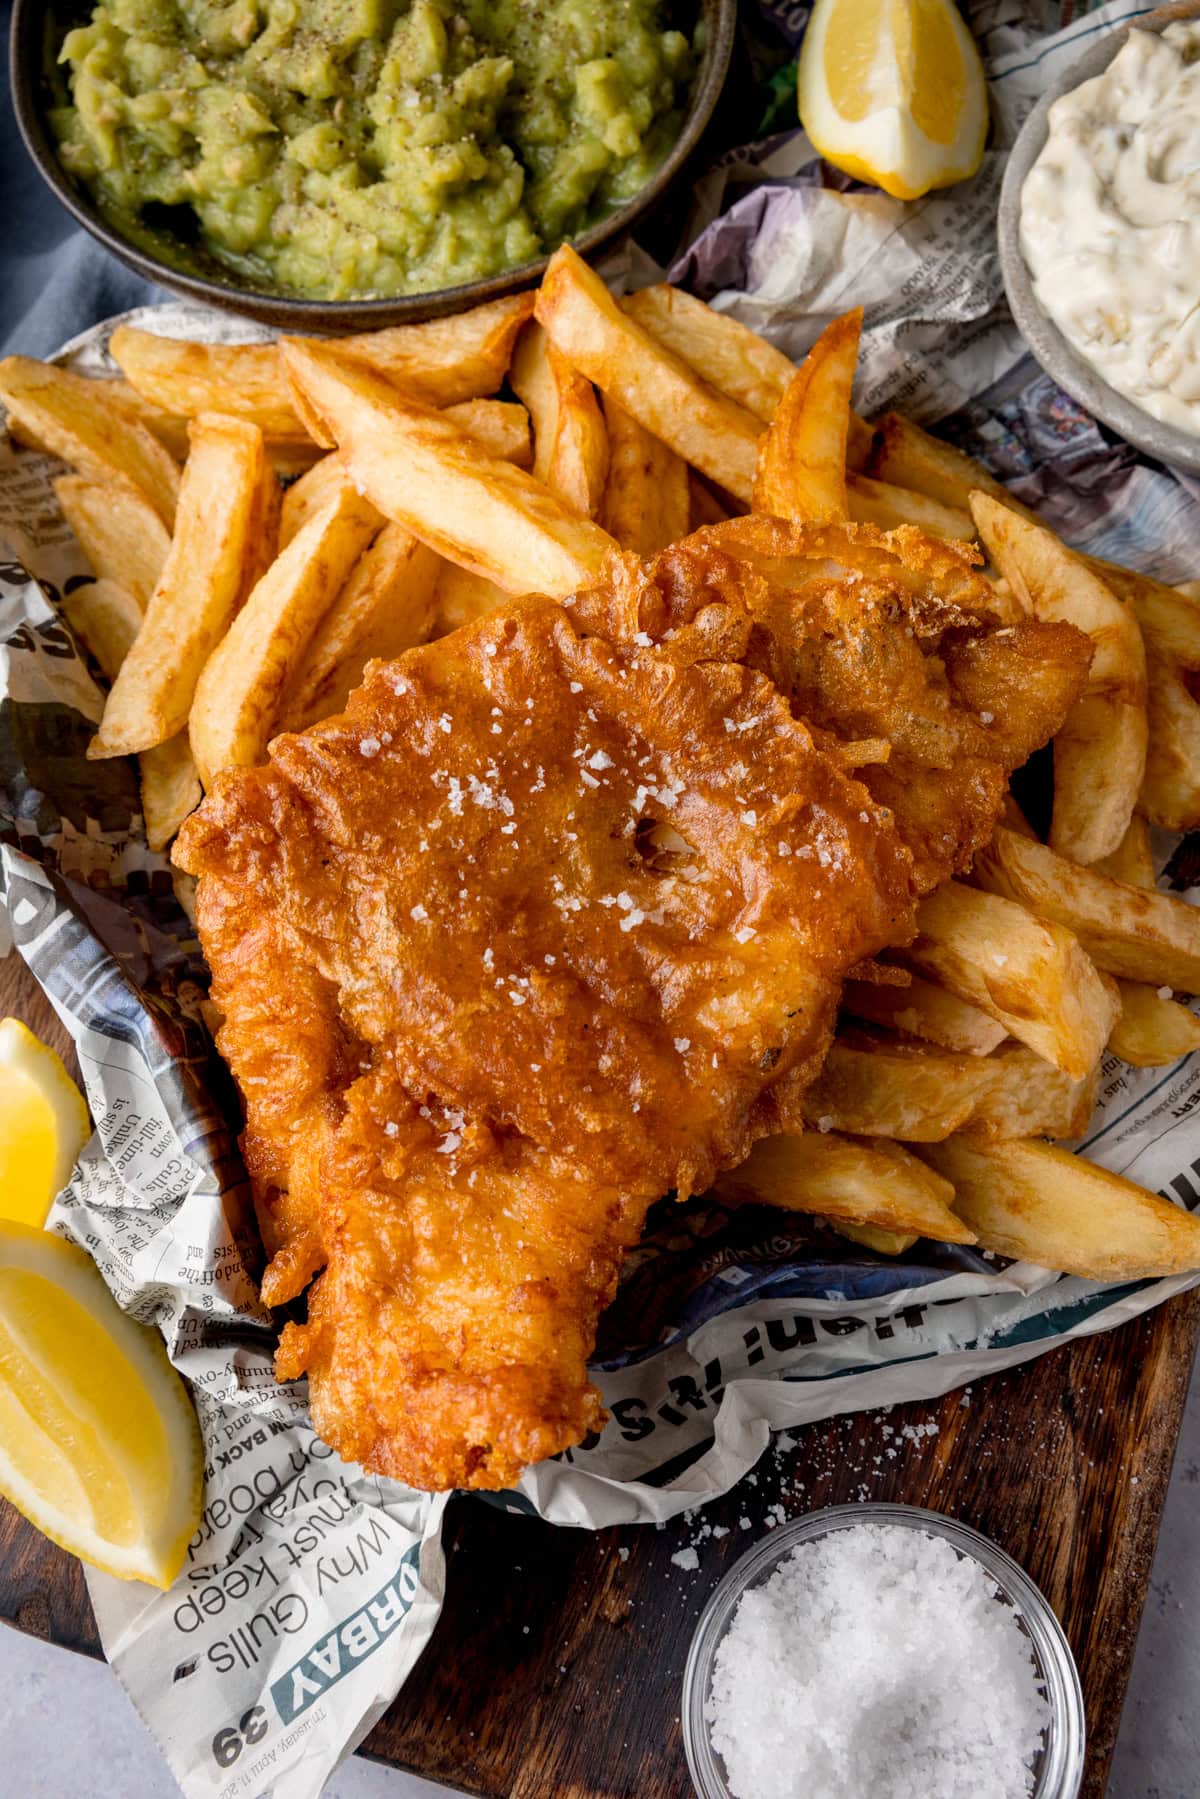 A tall, overhead shot of beer-battered fish. There is one beer-battered fish fillet, topped with flakes of salt, on a bed of chips. The food is on top of a newspaper. To the left of the fish and chips are two wedges of lemon. In the top left of the image, there is a black bowl of mushy peas, with another wedge of lemon to the right of it. In the top right of the image, there is a grey dish of tartare sauce. This is all on a wooden board. On the bottom right of the wooden board, there is a clear dish of sea salt. This is all placed on a white marble background.